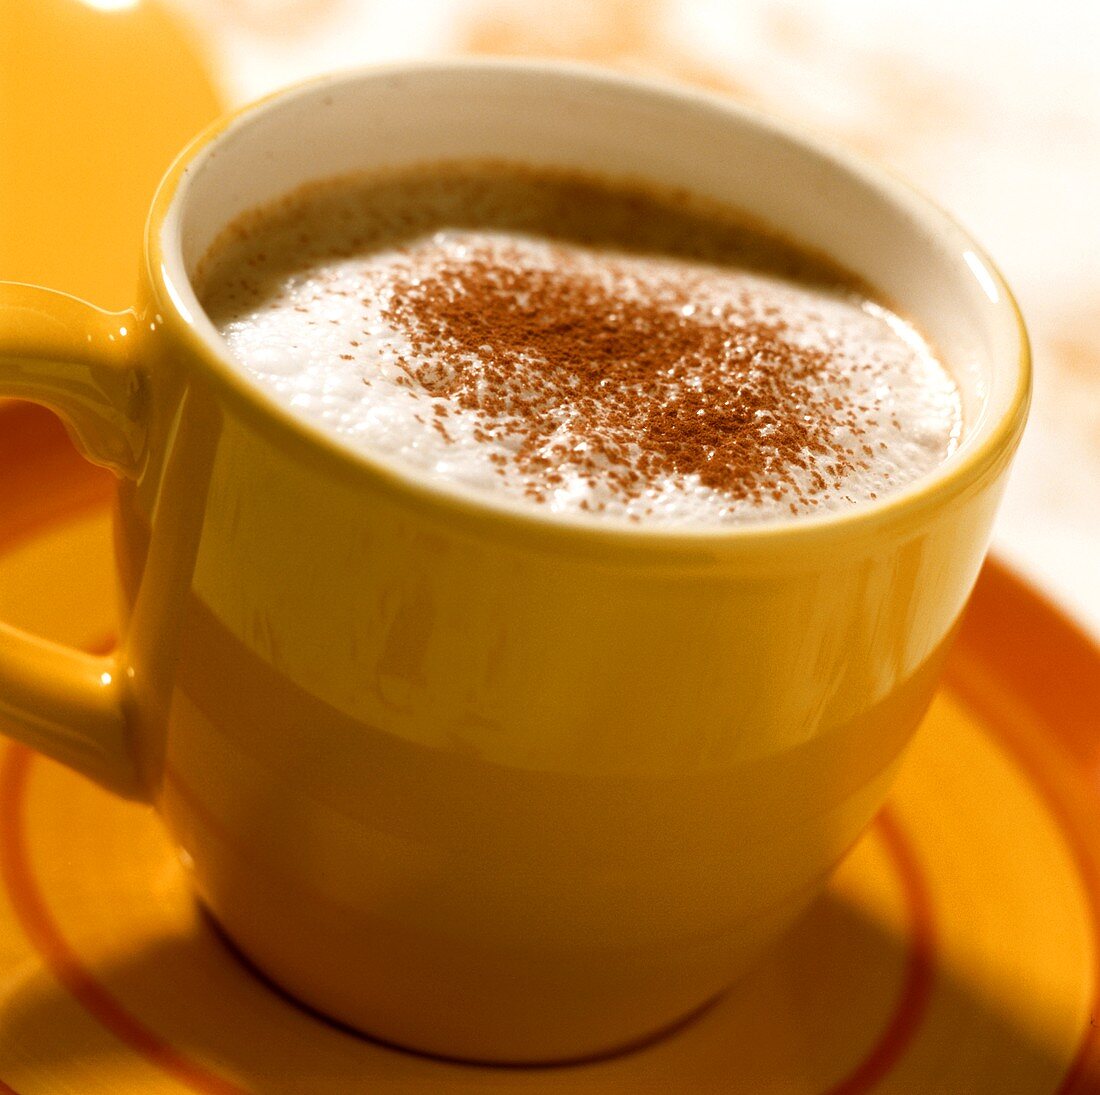 Children's cappuccino in a yellow cup